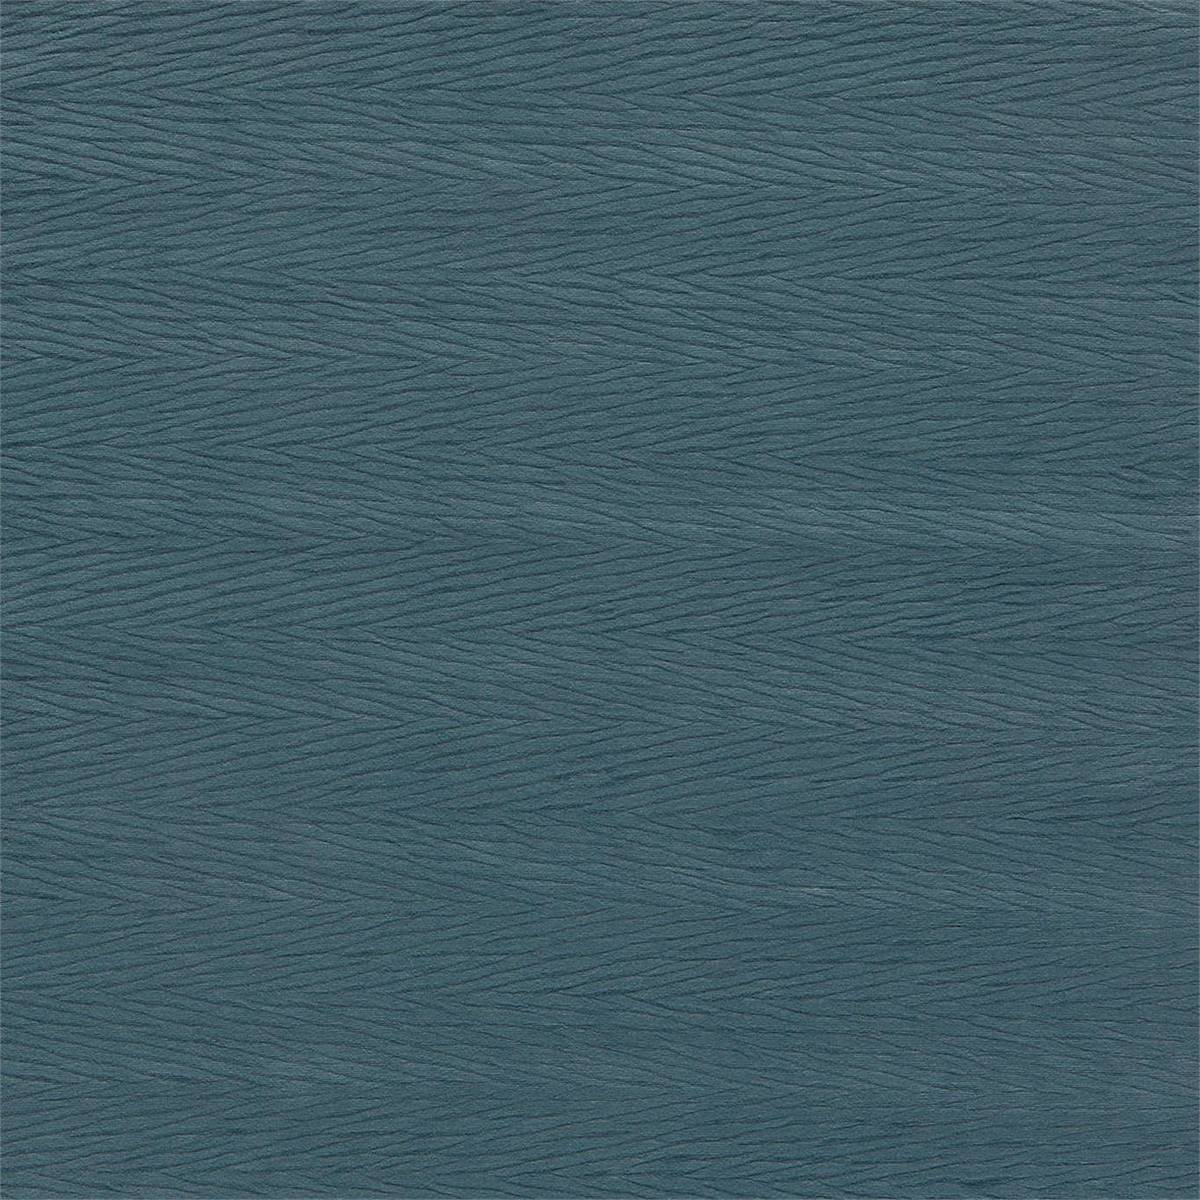 Florio Harbour Fabric by Harlequin